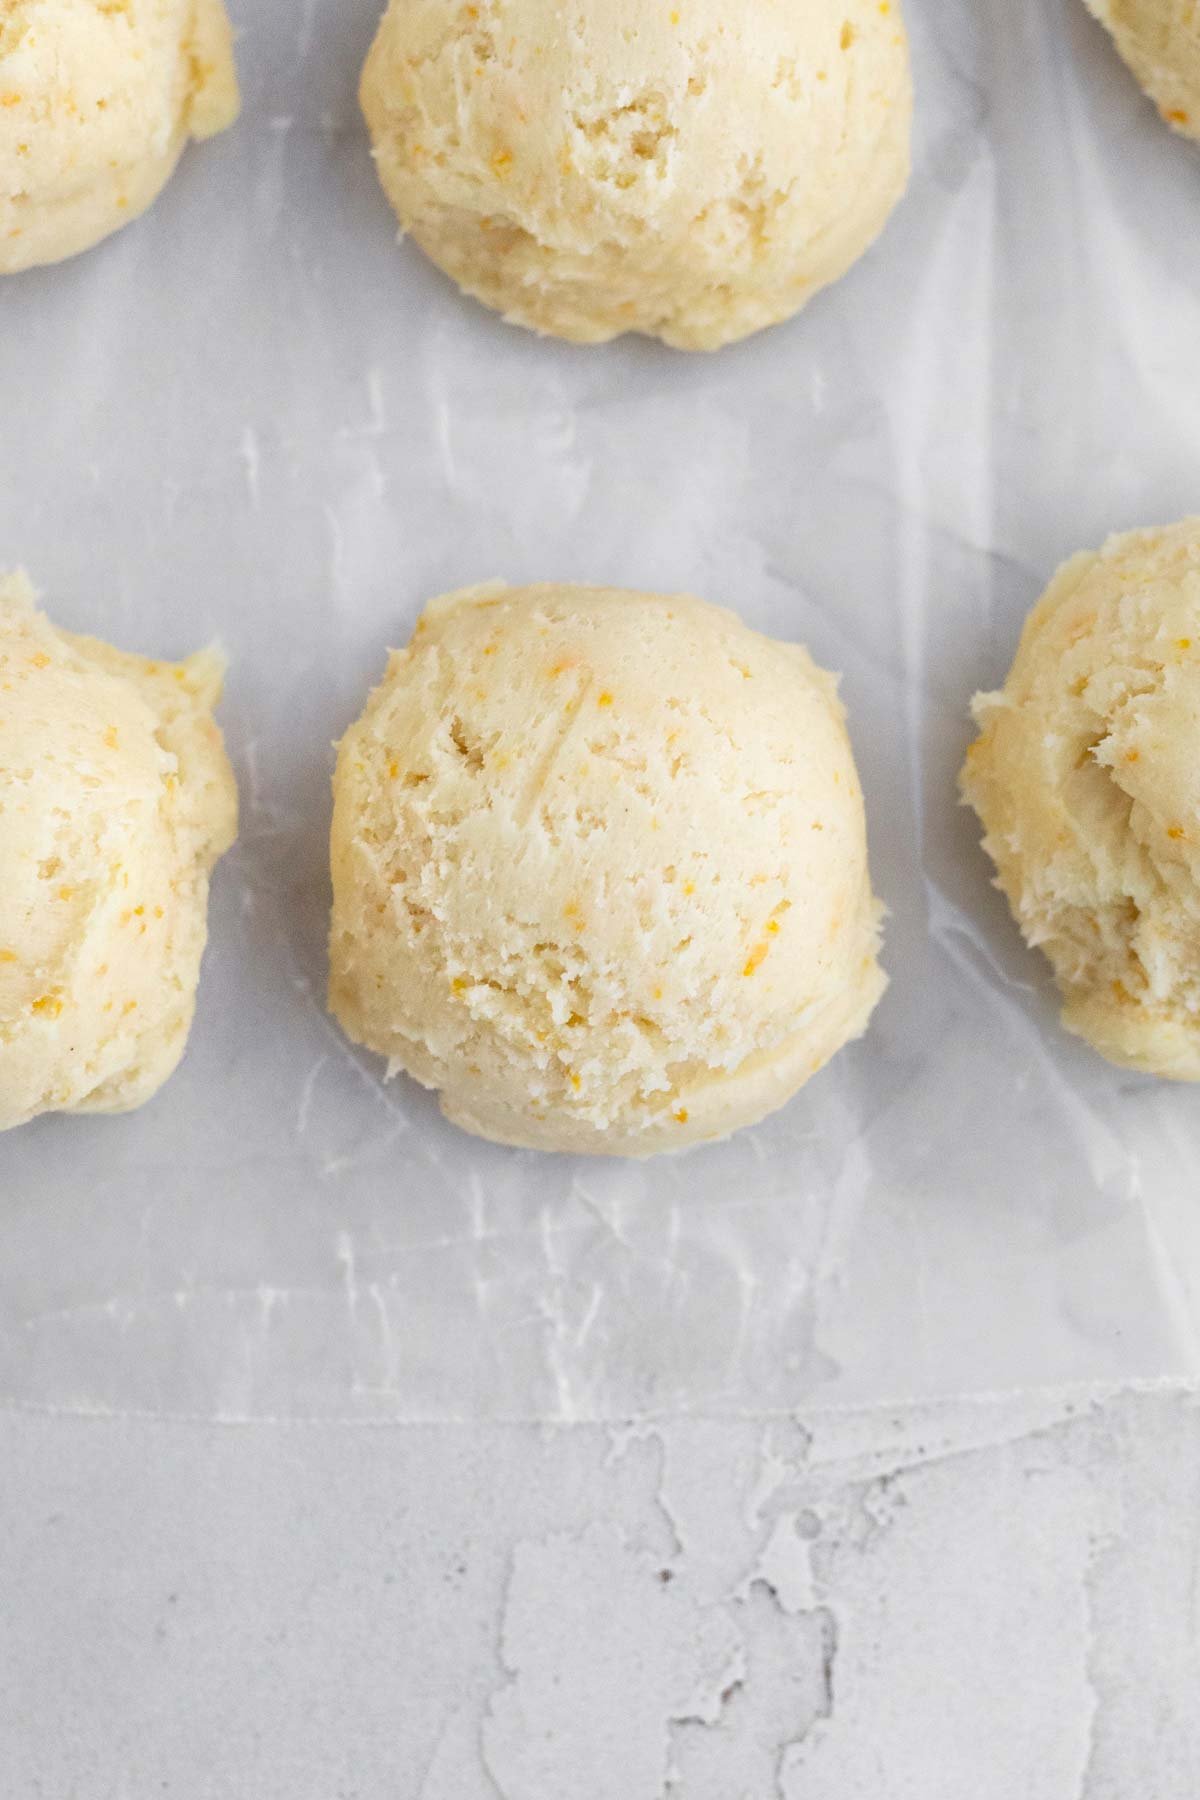 Scooping balls of cookie dough with bright orange flecks in them.